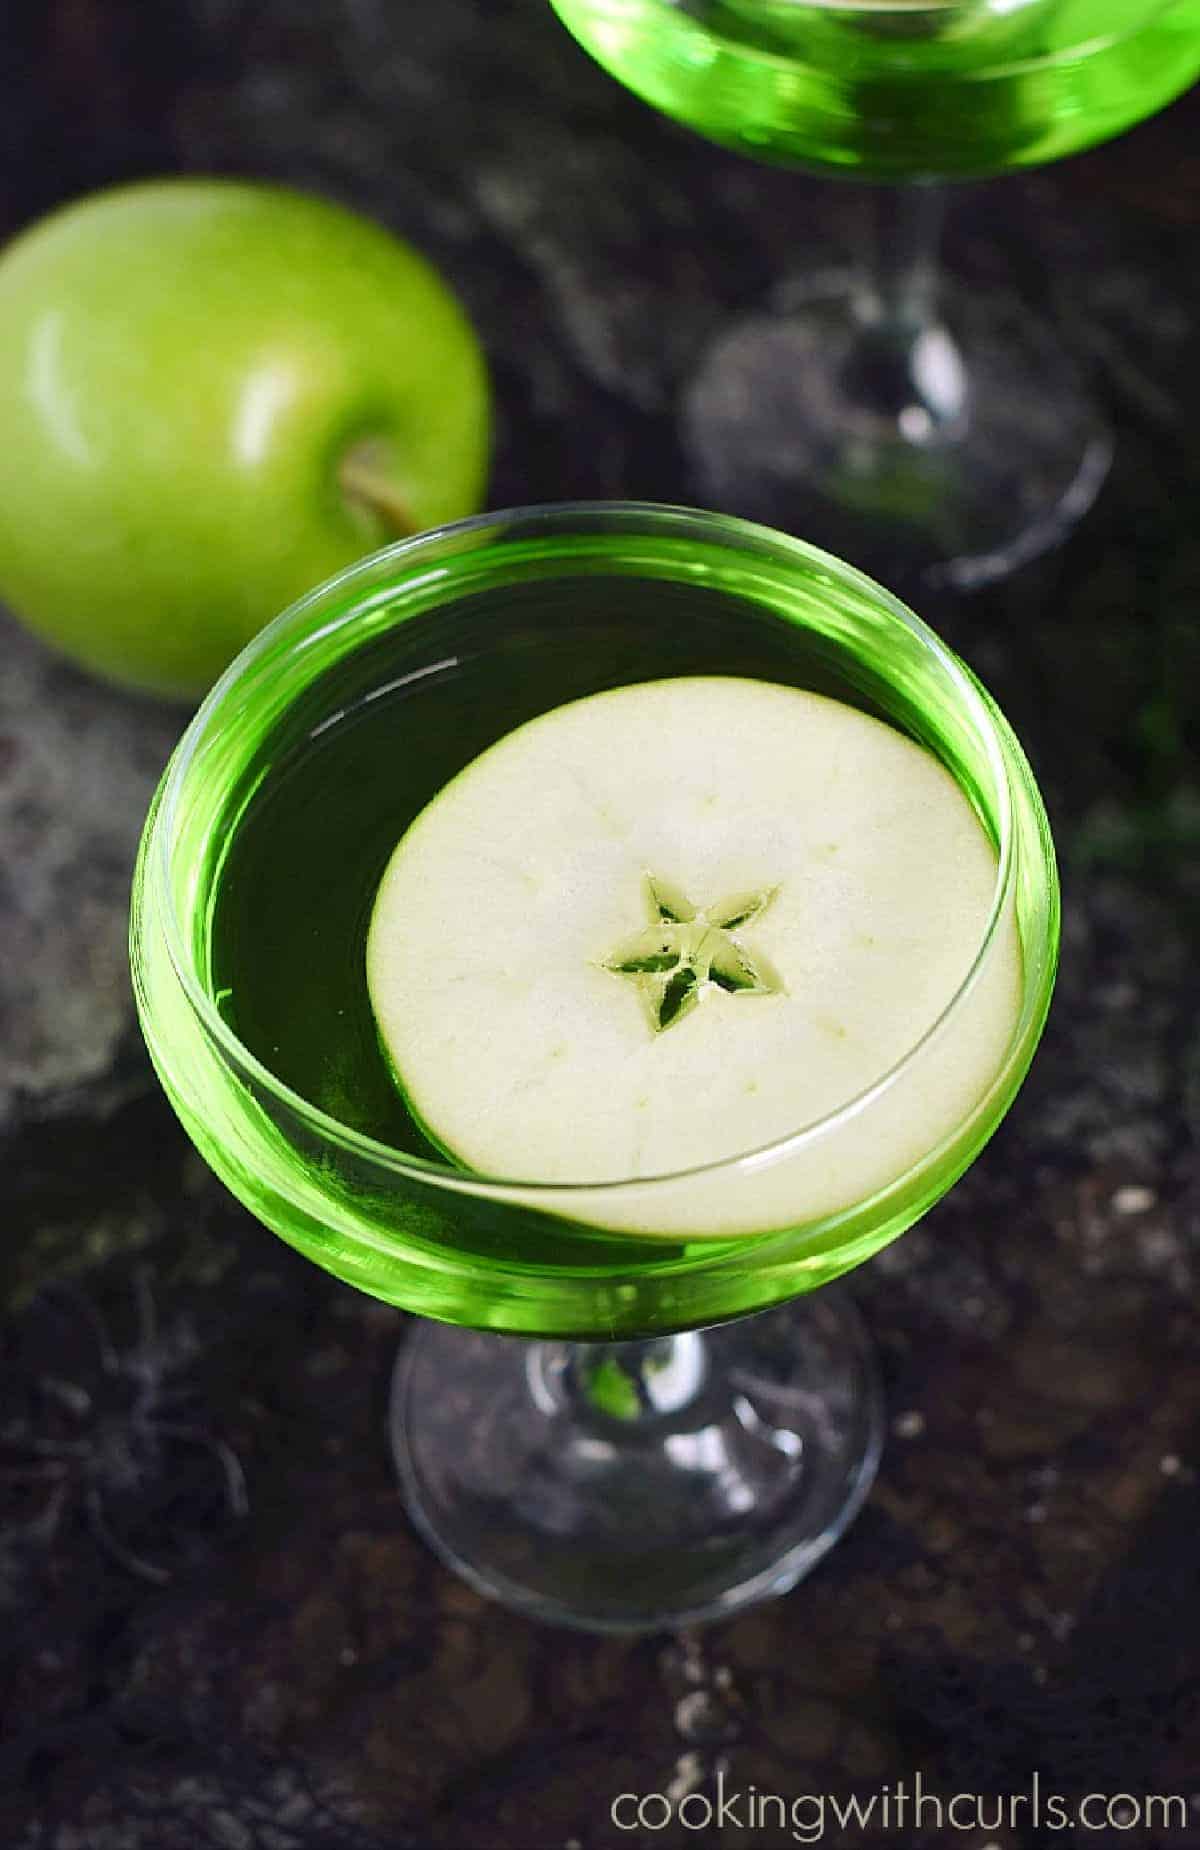 Looking down on a green cocktail with a floating apple slice with a second drink in the background with a green apple.